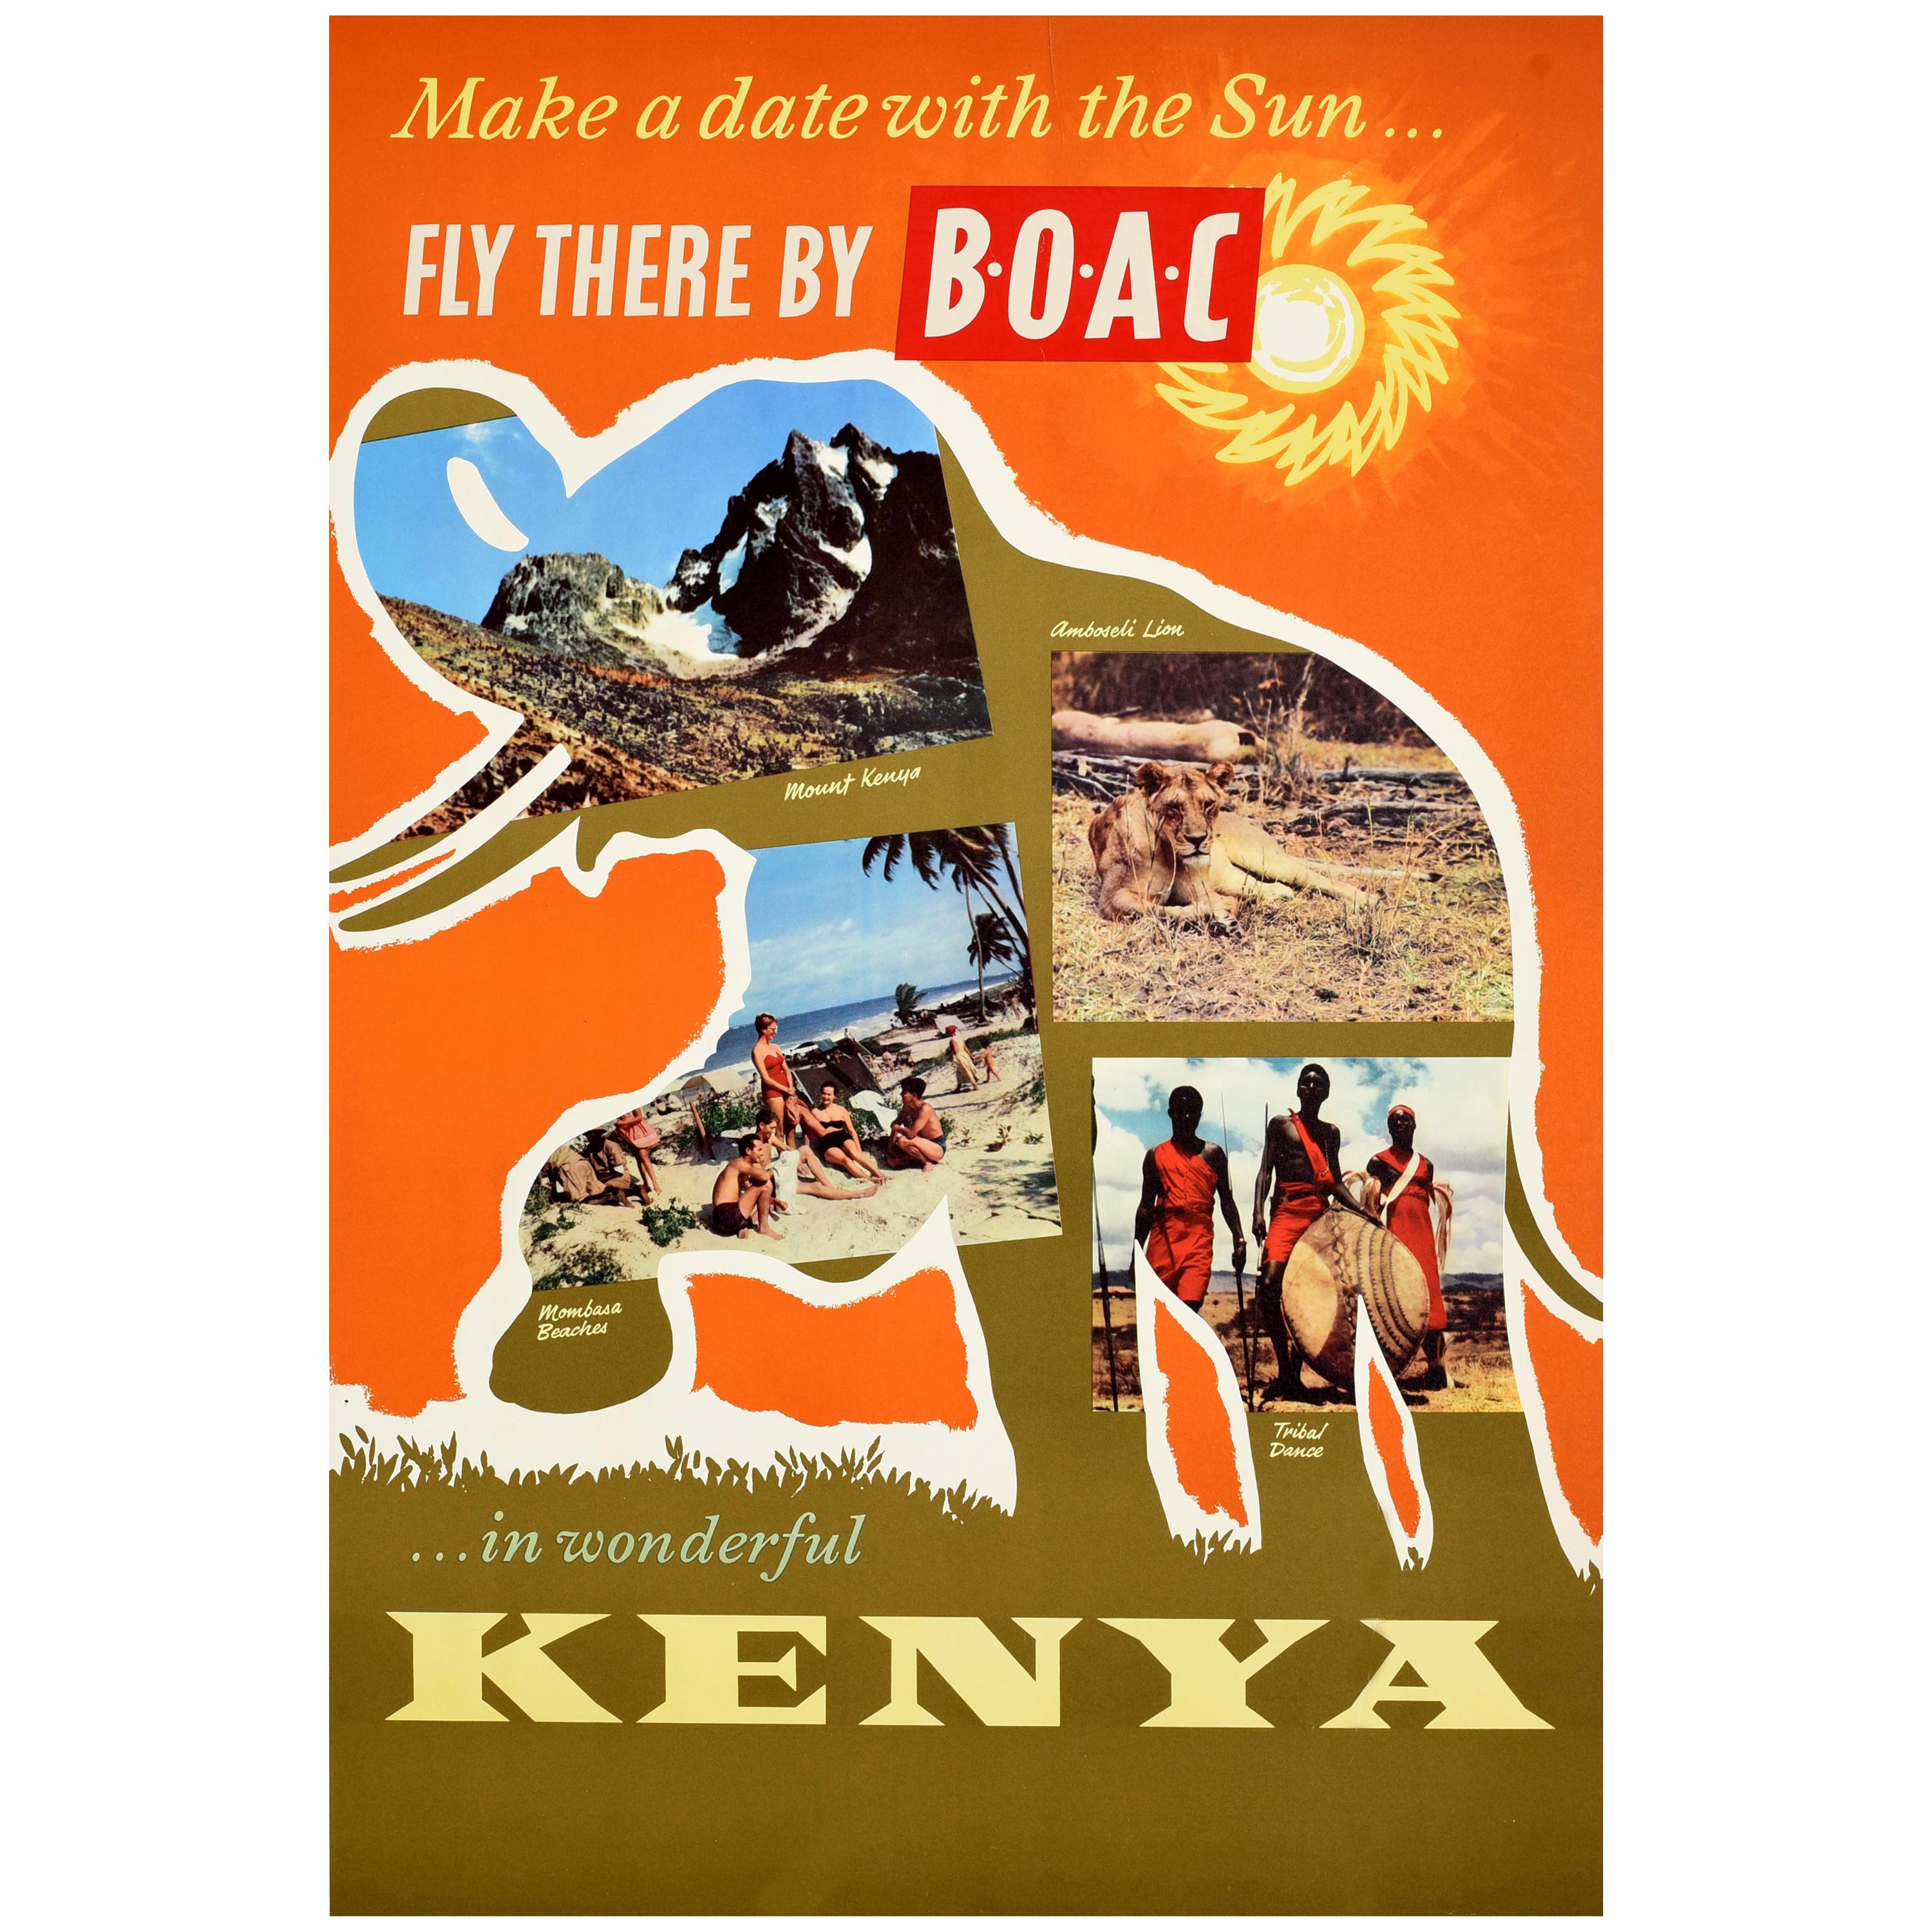 Original Vintage Poster Make A Date With The Sun In Wonderful Kenya BOAC Travel